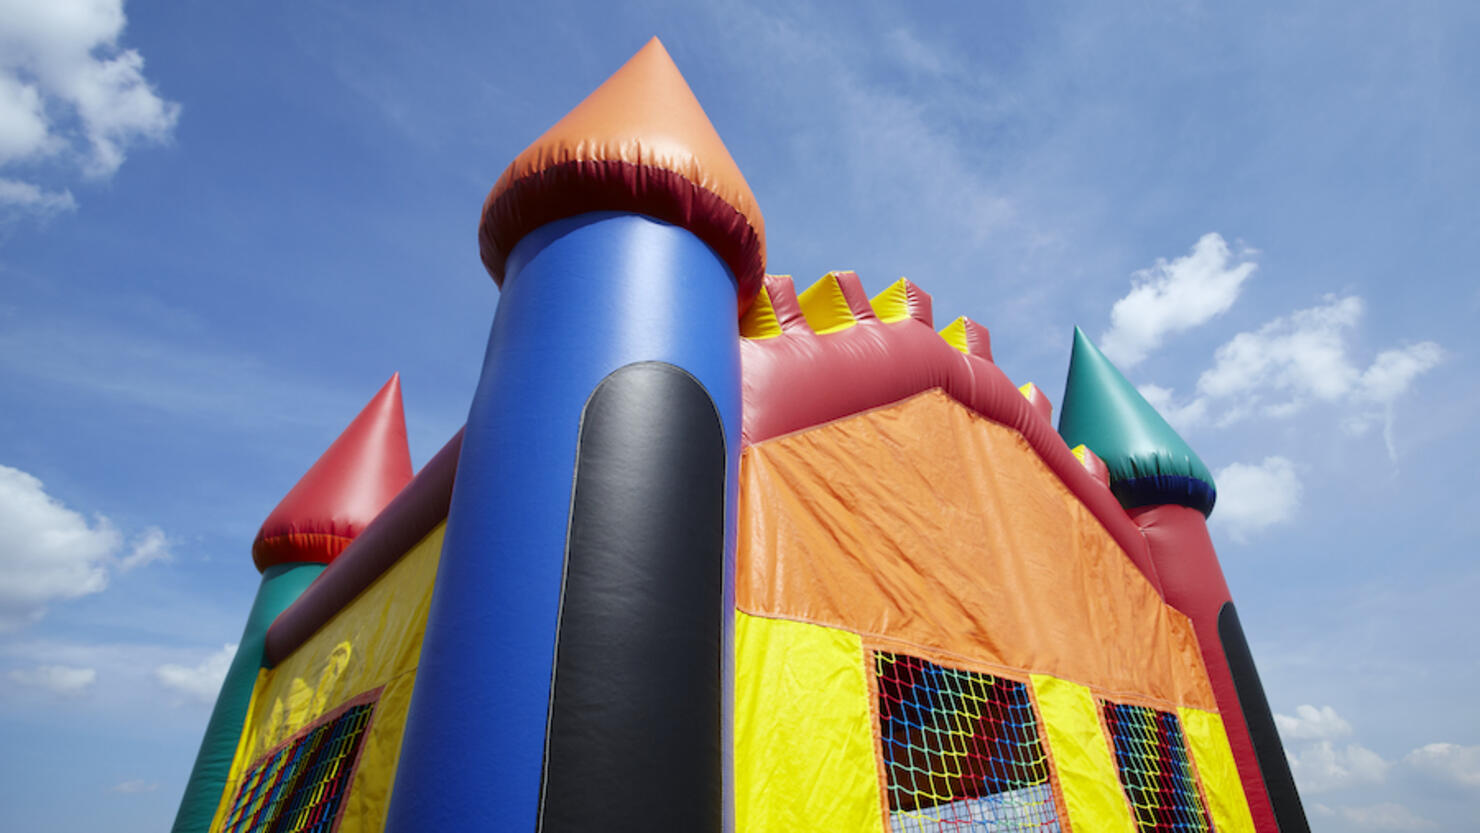 Children's Bouncy Castle Inflatable Playground Top Half